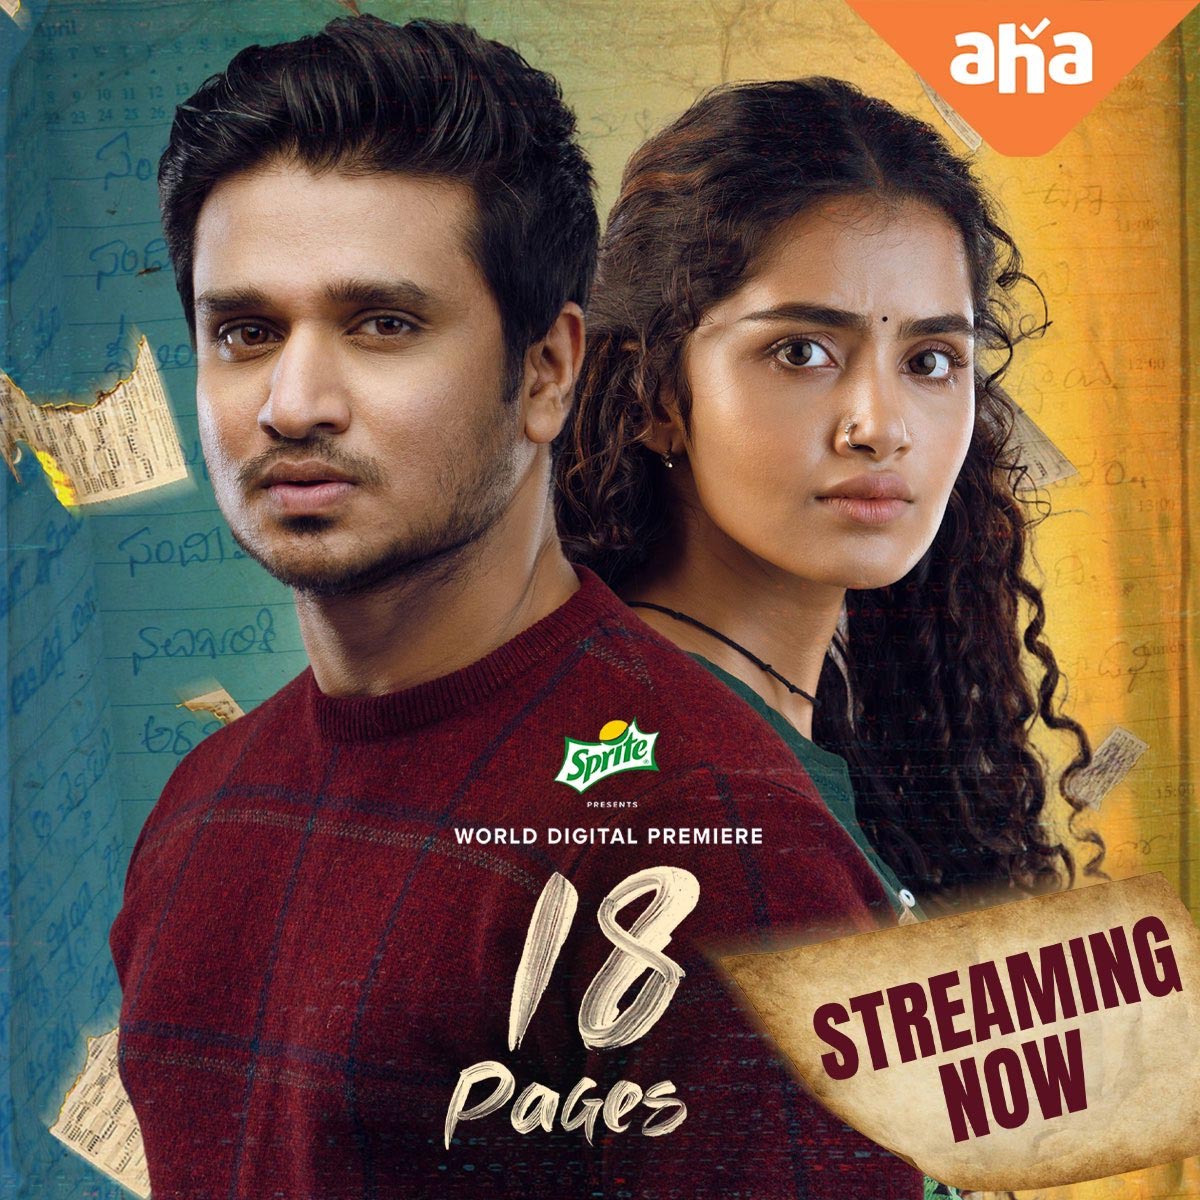 Nikhil 18 Pages streaming on Aha